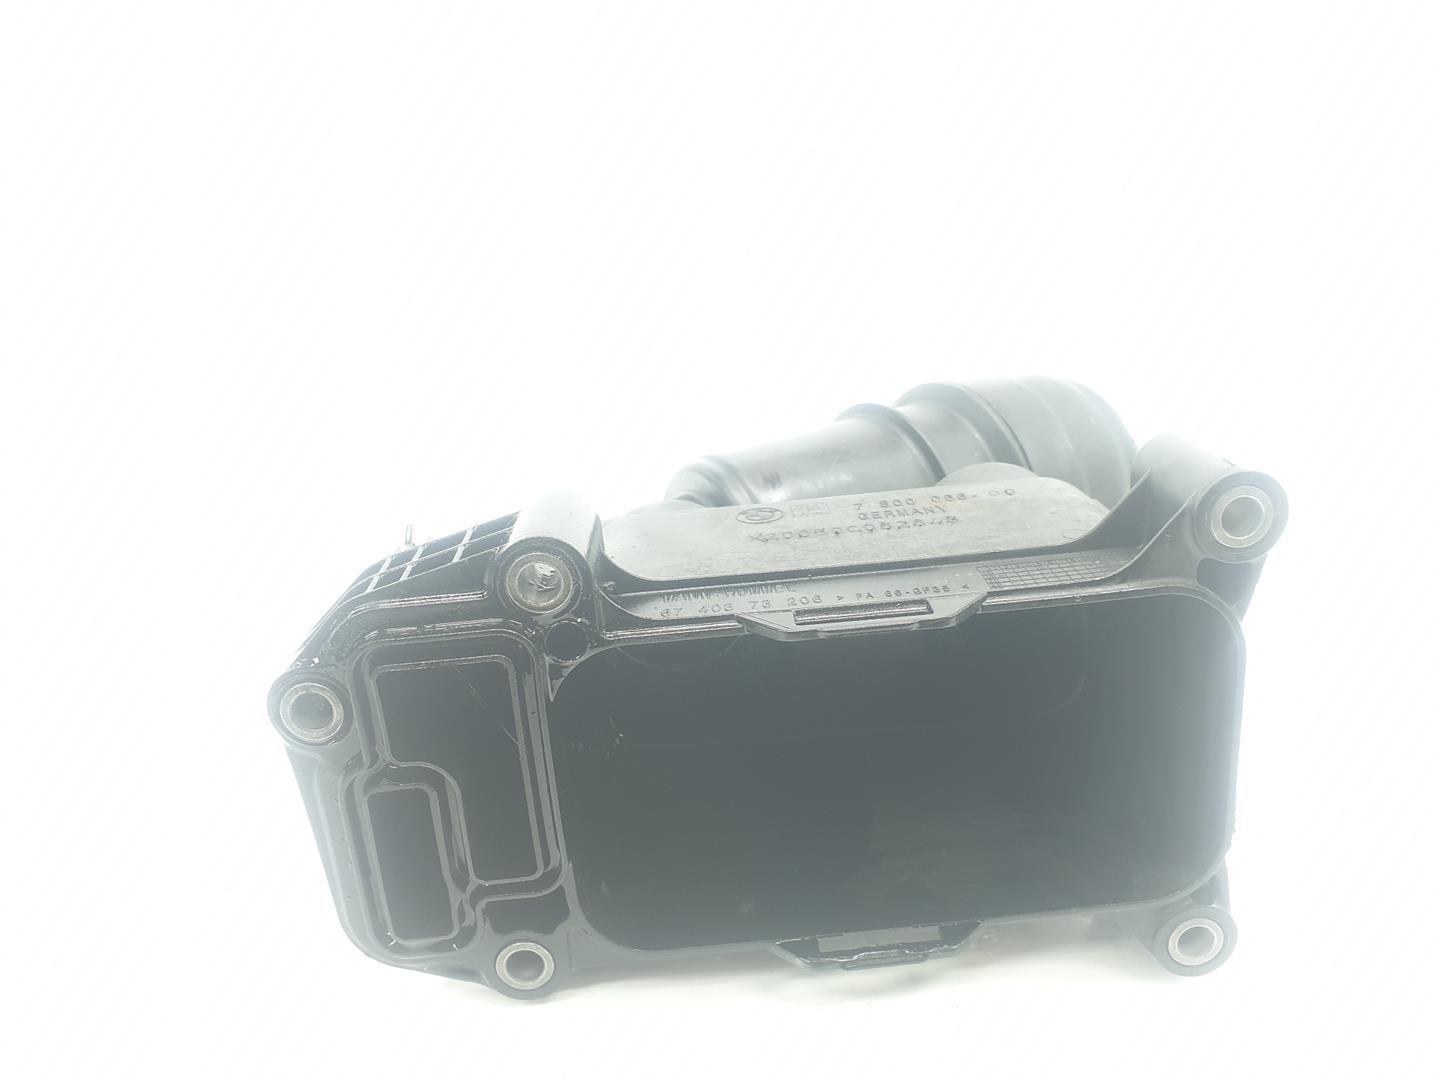 BMW X6 E71/E72 (2008-2012) Other Engine Compartment Parts 7800066, 7800066, 1111AA 24700060